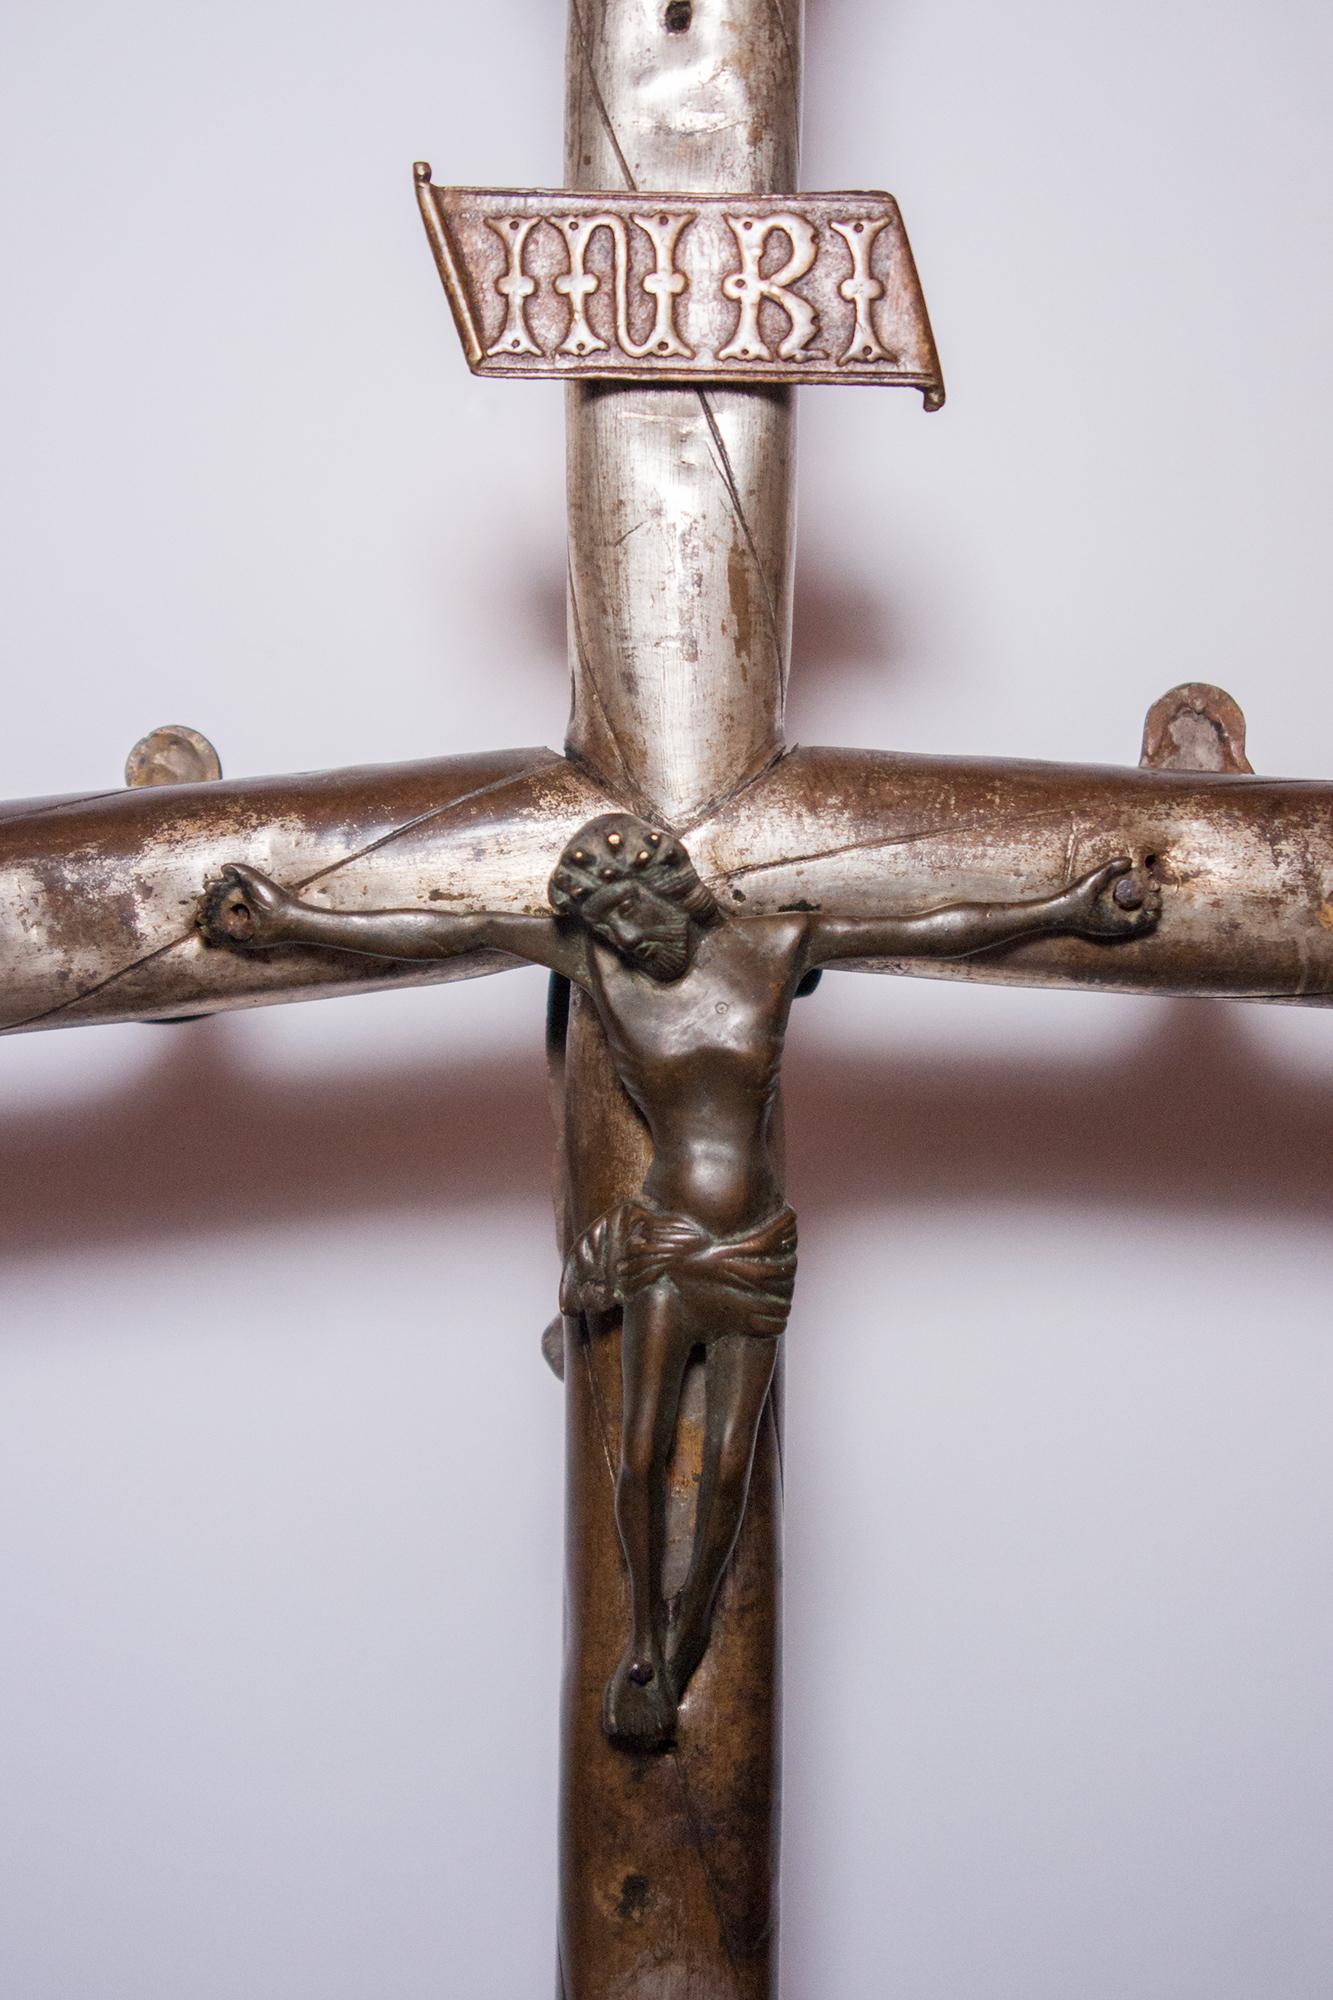 Beautiful processional cross from the early 16th century.
Puy de Dôme or Massif Central, France.
On one side a beautiful corpus of Christ around 1500, surmounted by the titulus INRI, and on the other side of a Madonna and Child applique , surmounted